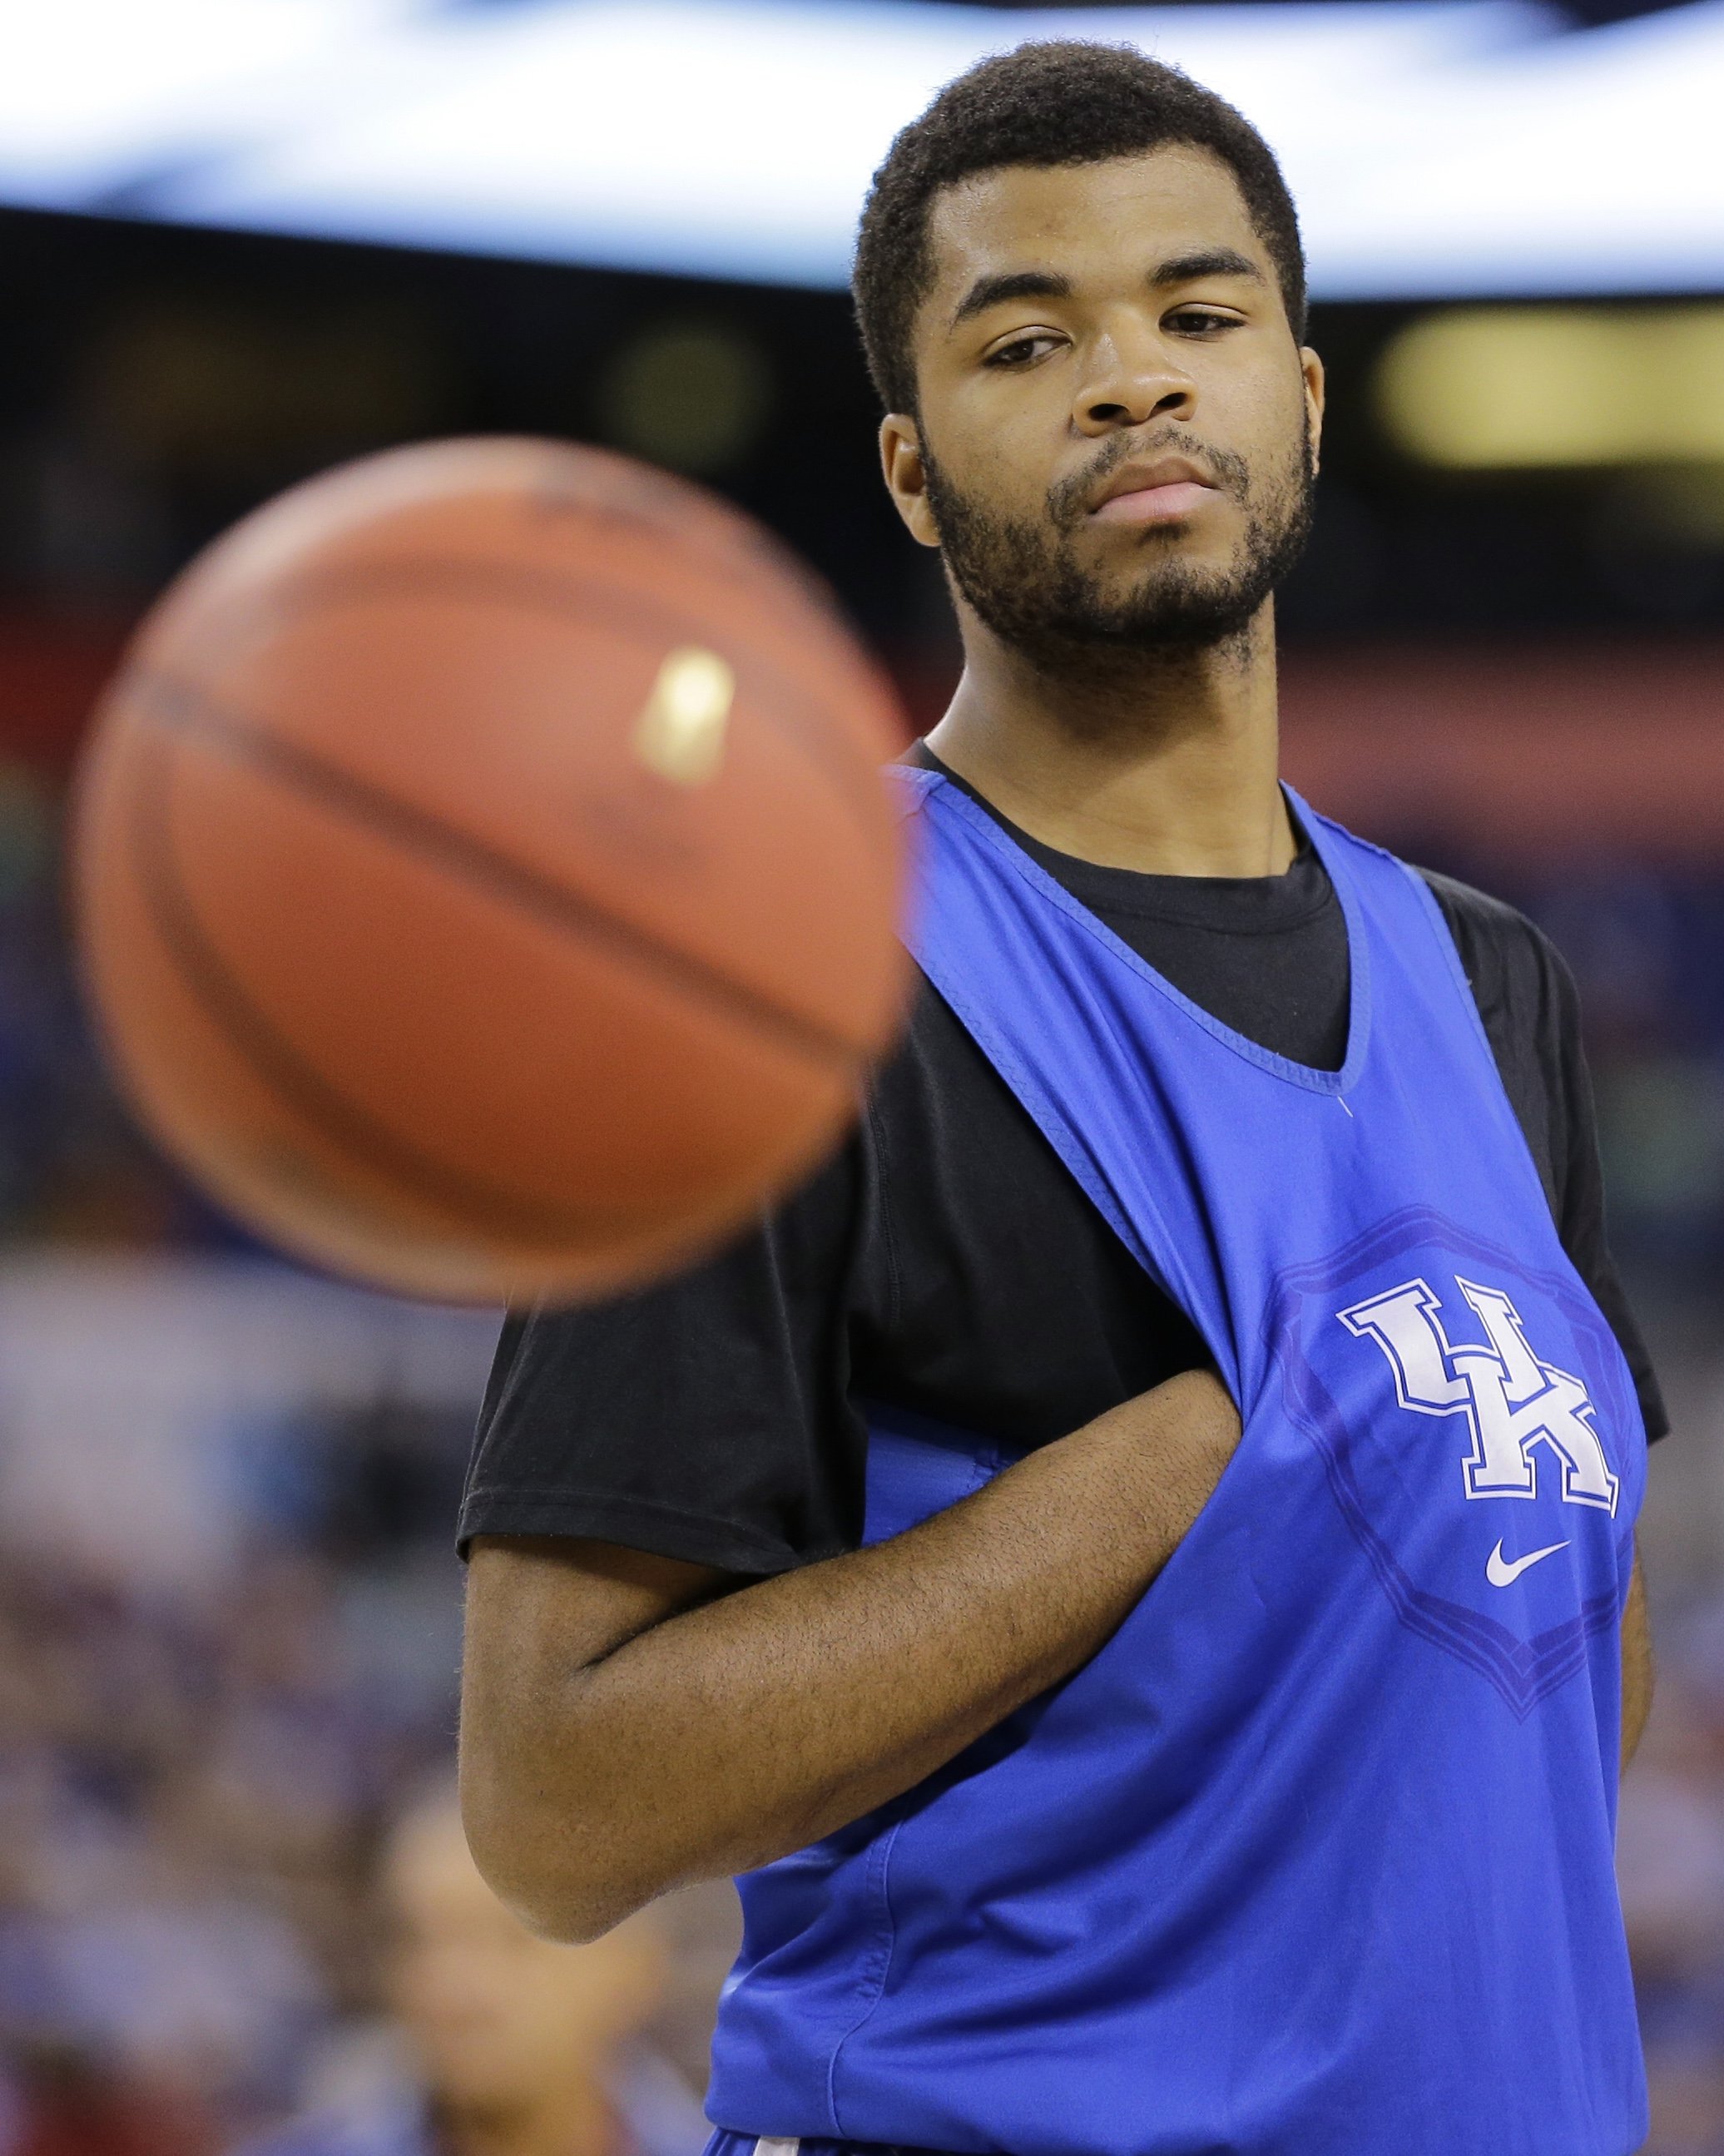 Kentucky's Andrew Harrison watches a ball during a practice session for the NCAA Final Four tournament college basketball semifinal game, in Indianapolis on April 3, 2015.